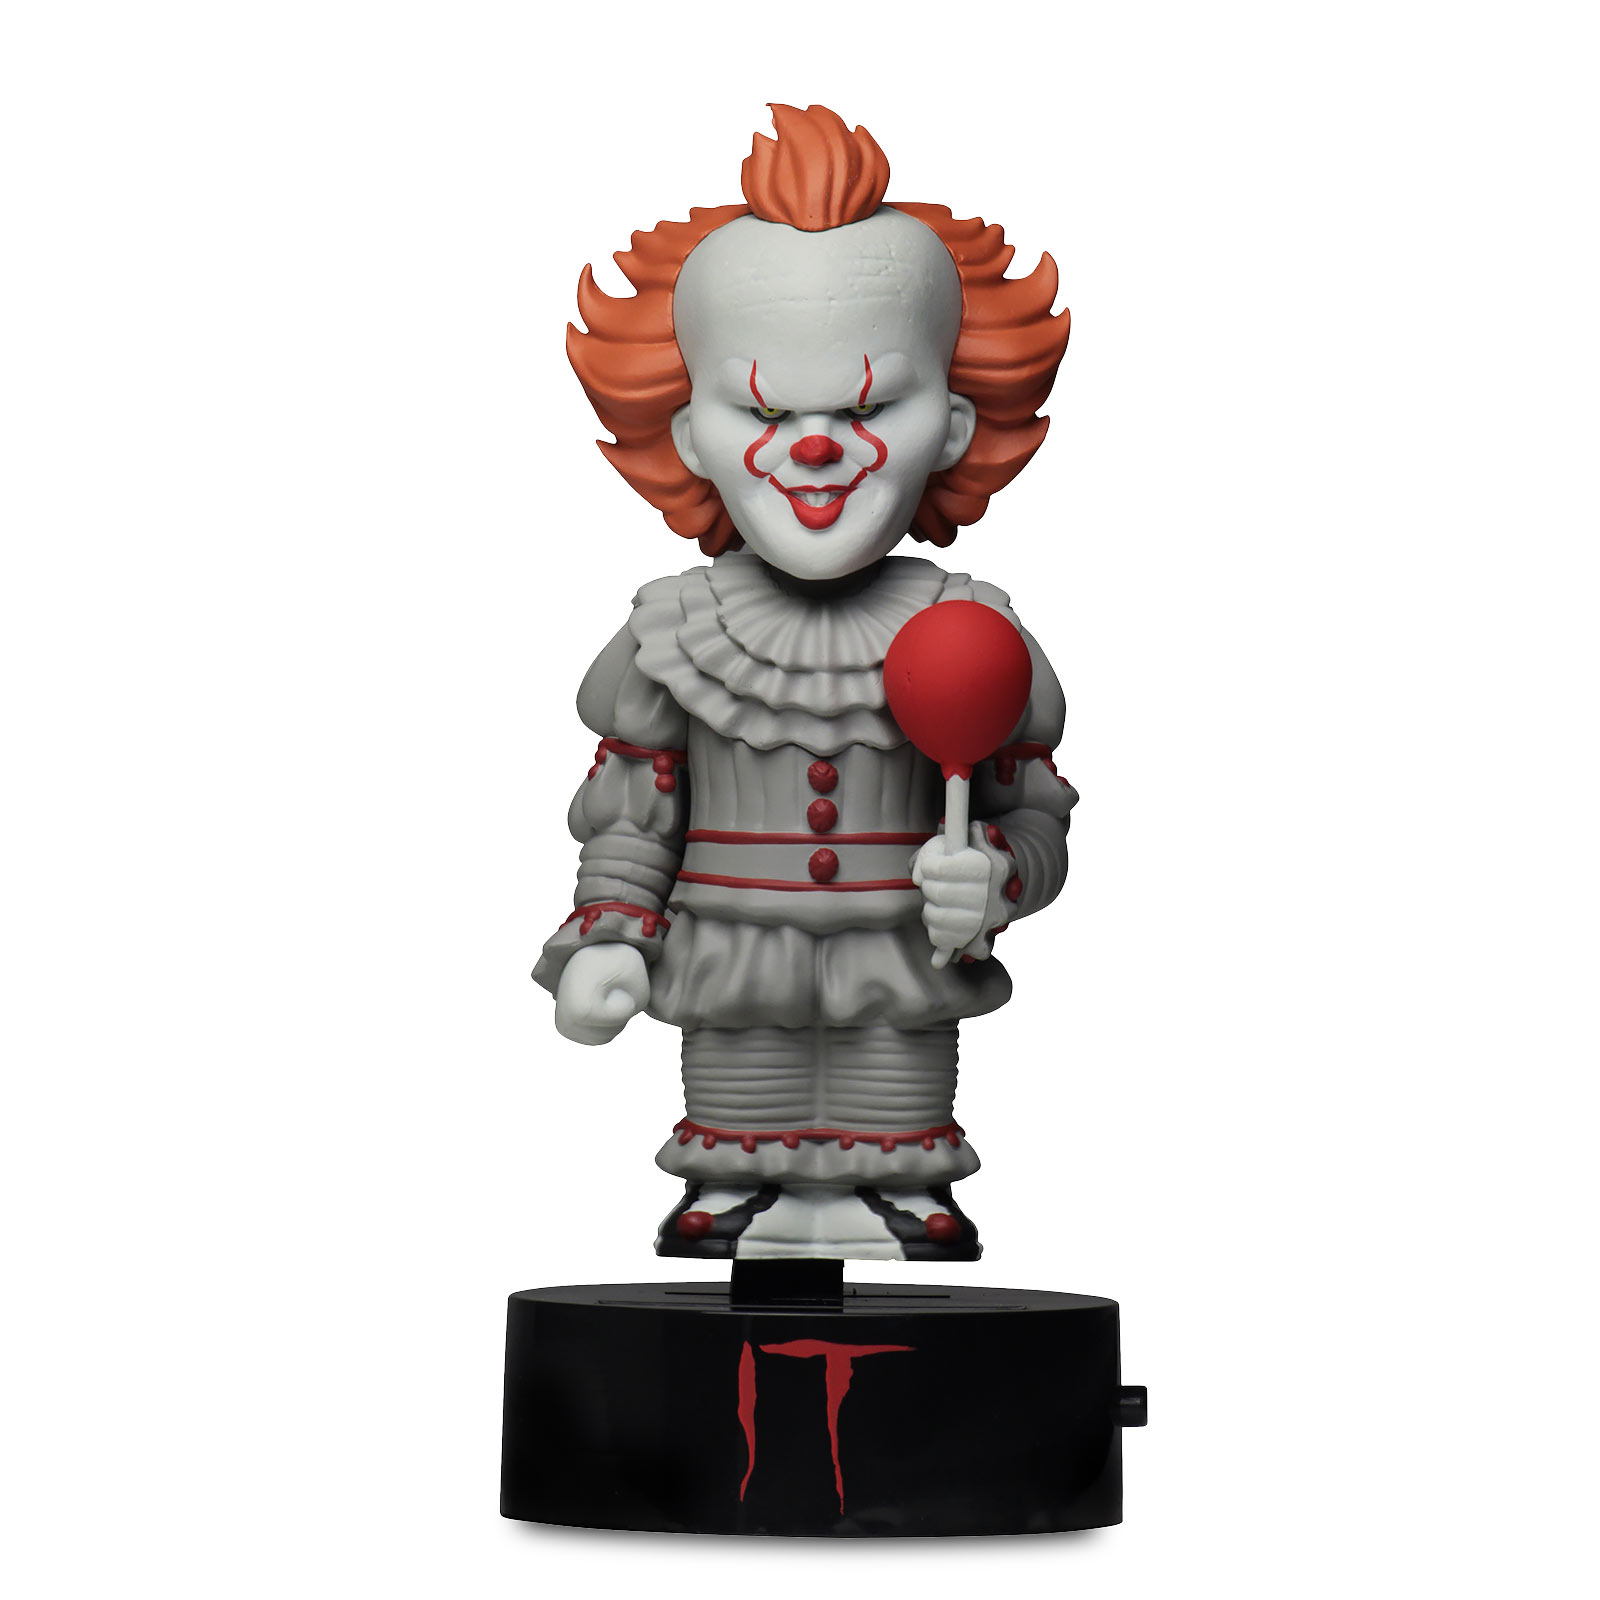 Stephen King's CA - Pennywise Body Knockers Figurine Solaire